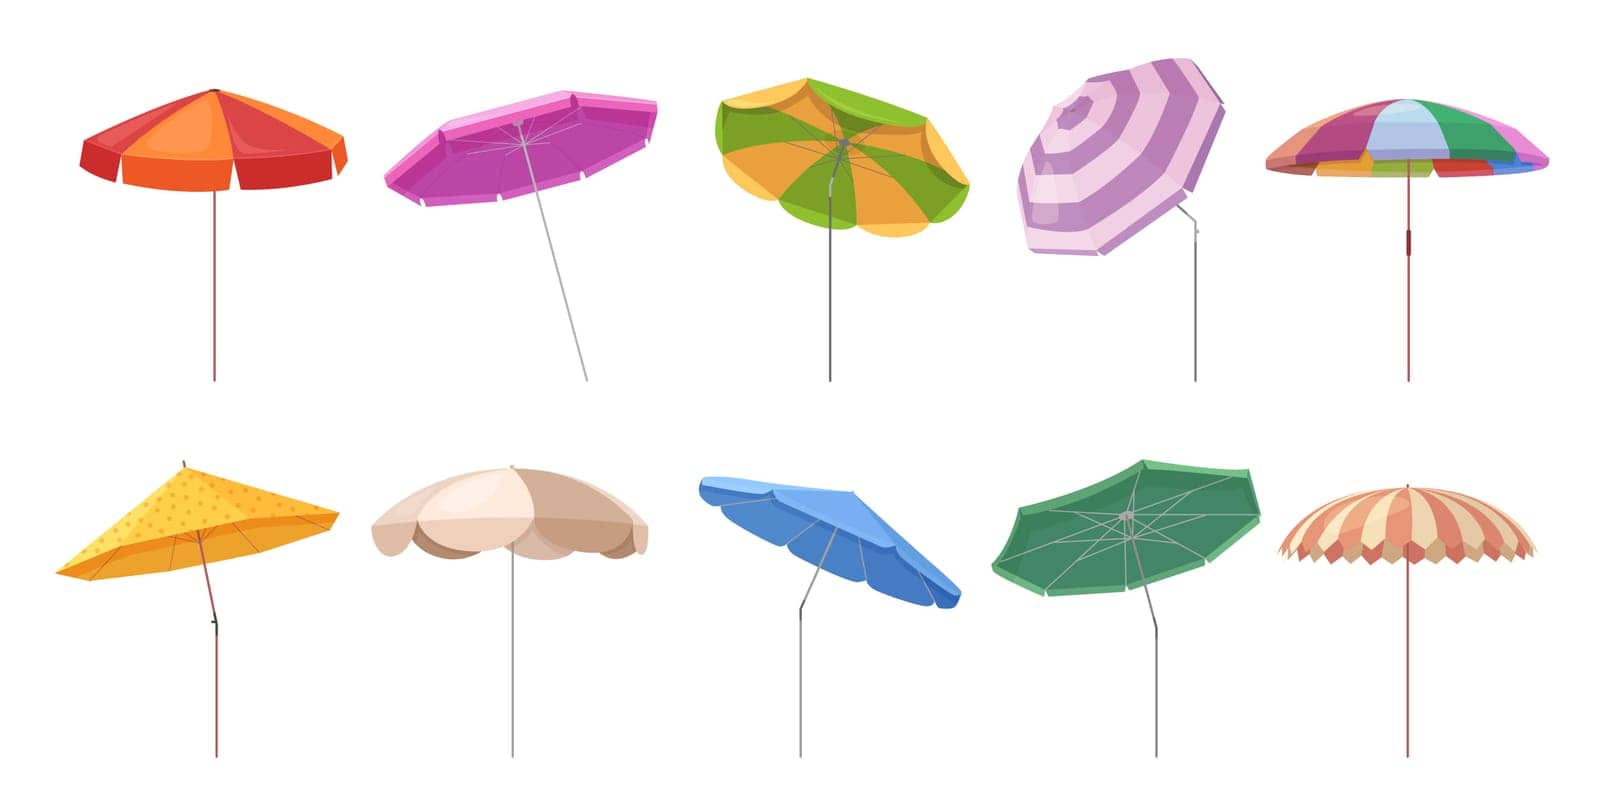 Beach umbrellas set, collection of summer sunshade with different colors and patterns by Popov